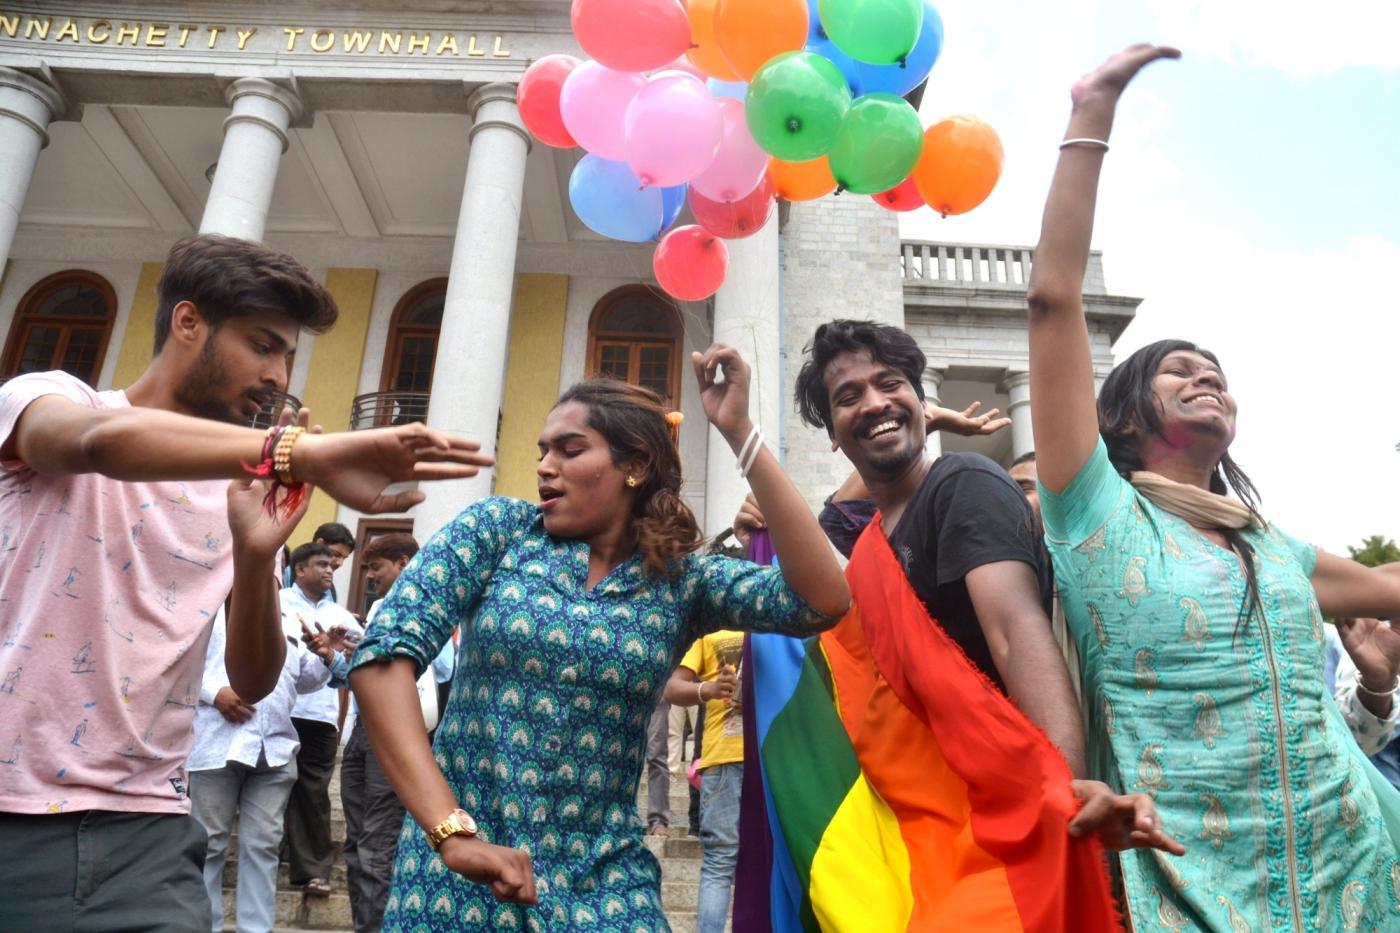 Bengaluru: LGBTIQ (lesbian, gay, bisexual, transgender/transsexual, intersex and queer/questioning) supporters celebrate after the Supreme Court in a landmark decision decriminalised homosexuality by declaring Section 377, the penal provision which criminalised gay sex, as "manifestly arbitrary"; in Bengaluru on Sept 6, 2018. (Photo: IANS) by .